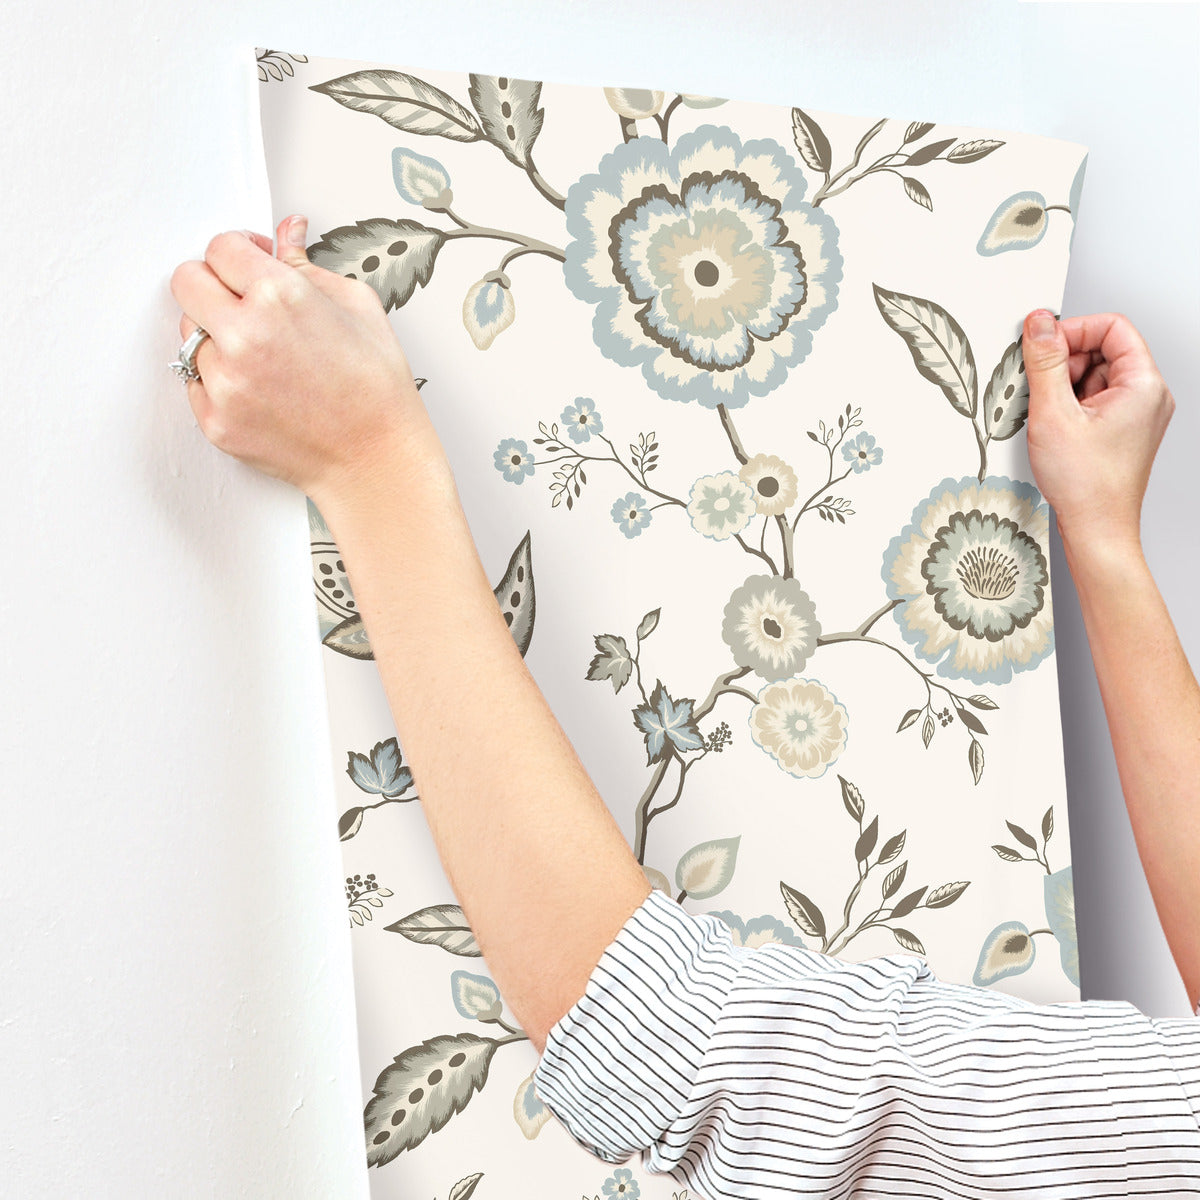 A person is holding up a sheet of *Dahlia Blooms Midnight/Multi Wallpaper Black, Pink (60 Sq.Ft.)* by York Wallcoverings with a floral design in shades of blue, gray, and beige against a blank white wall. The person wears a long-sleeved, striped shirt and has a ring on their left hand. The wallpaper features large flowers, leaves, and small buds, offering *Botanical Elegance*.